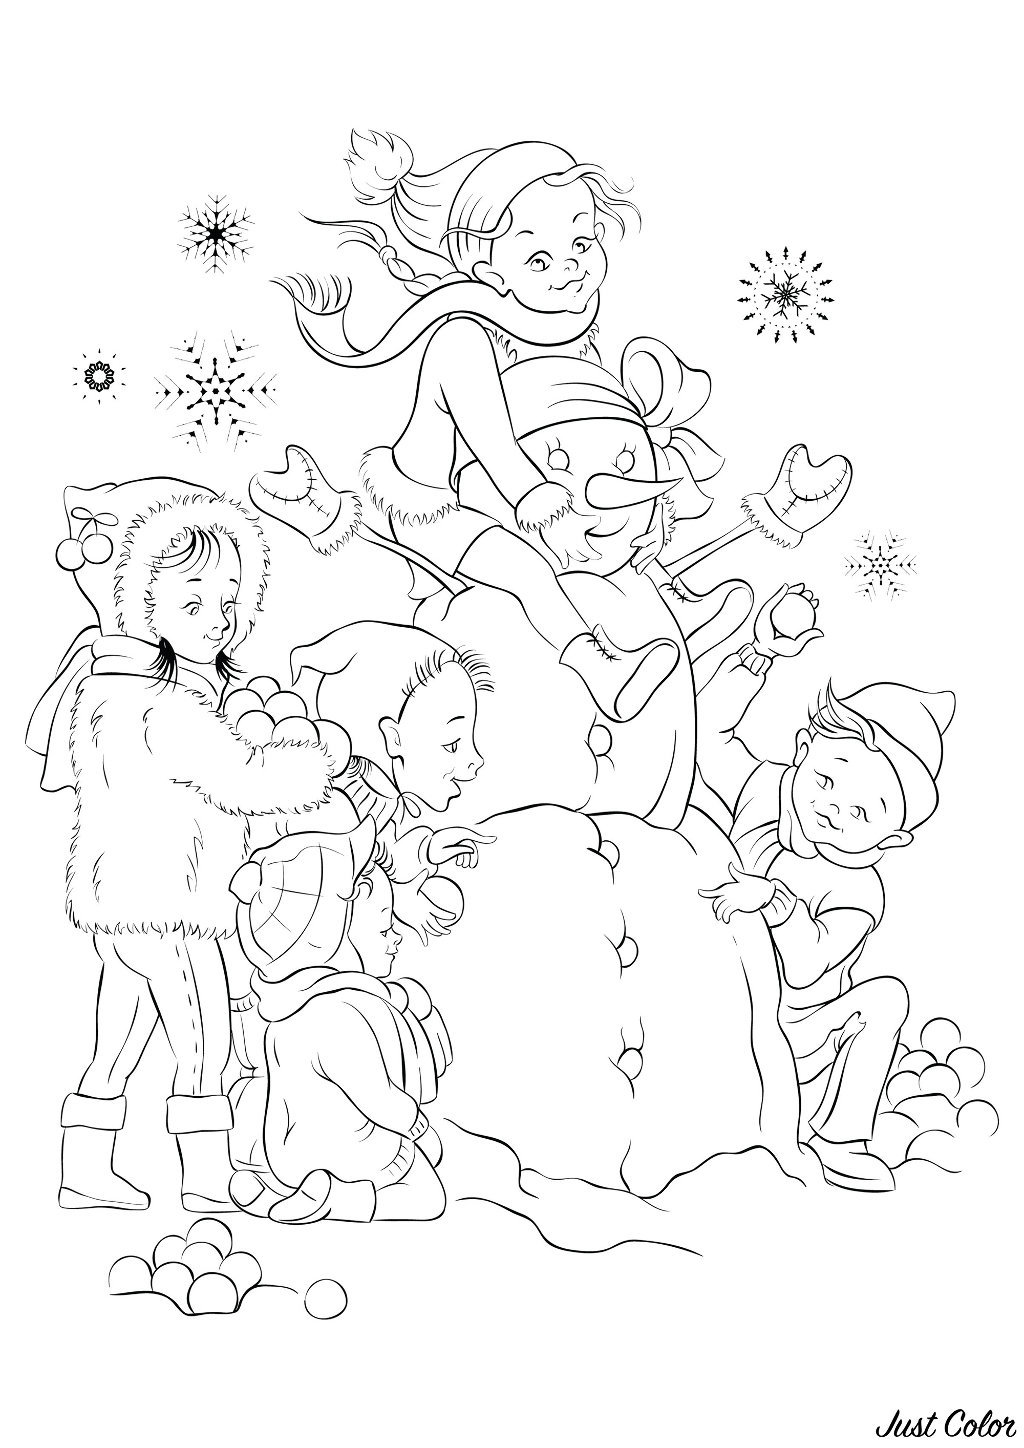 Children and the snowman they made together with fresh snow